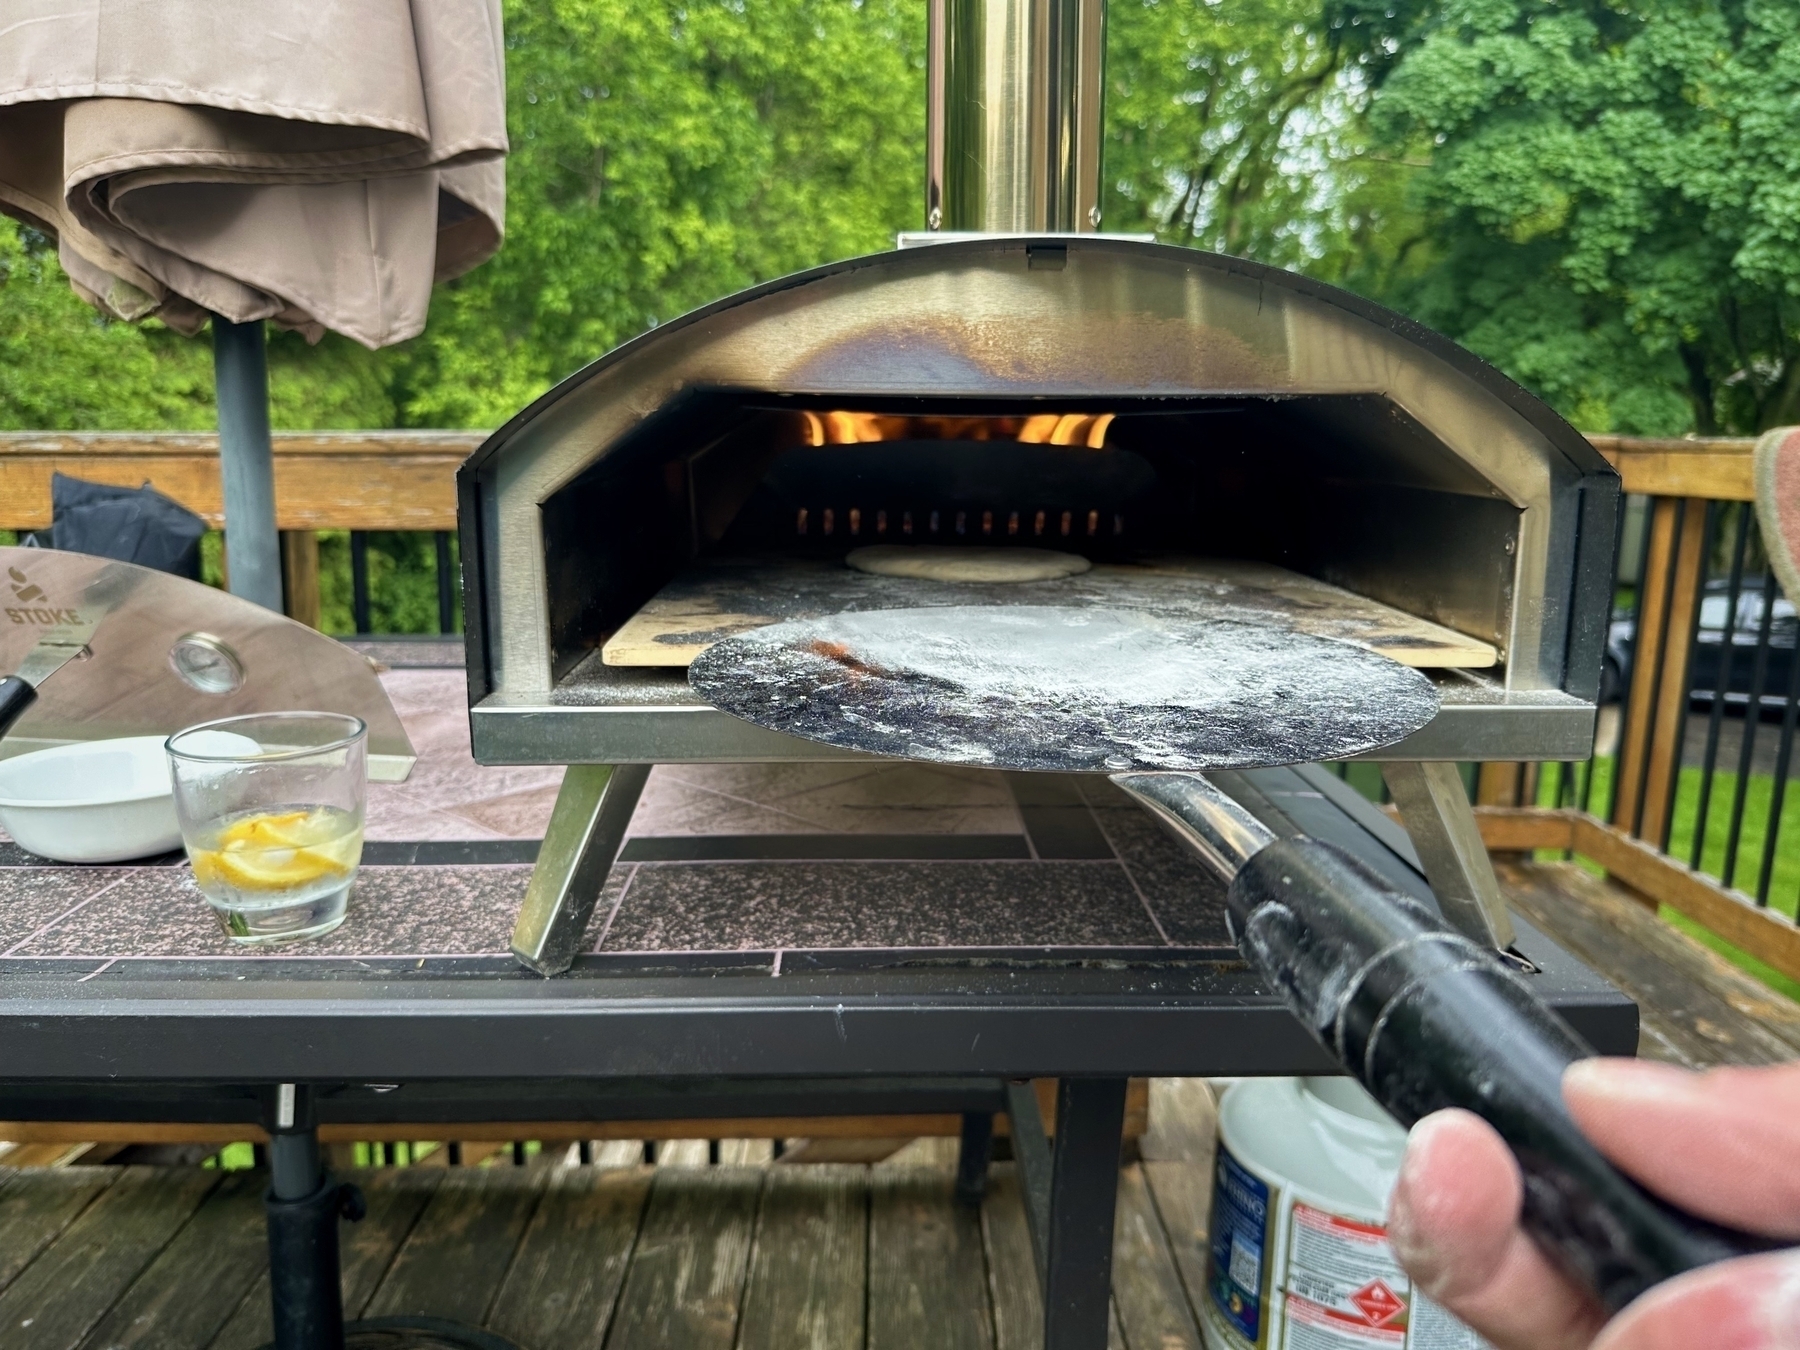 A pizza oven flames inside on a wooden table outdoors with a spatula lifting dough nearby. Items like a glass with lemon slices and an umbrella are on the table.